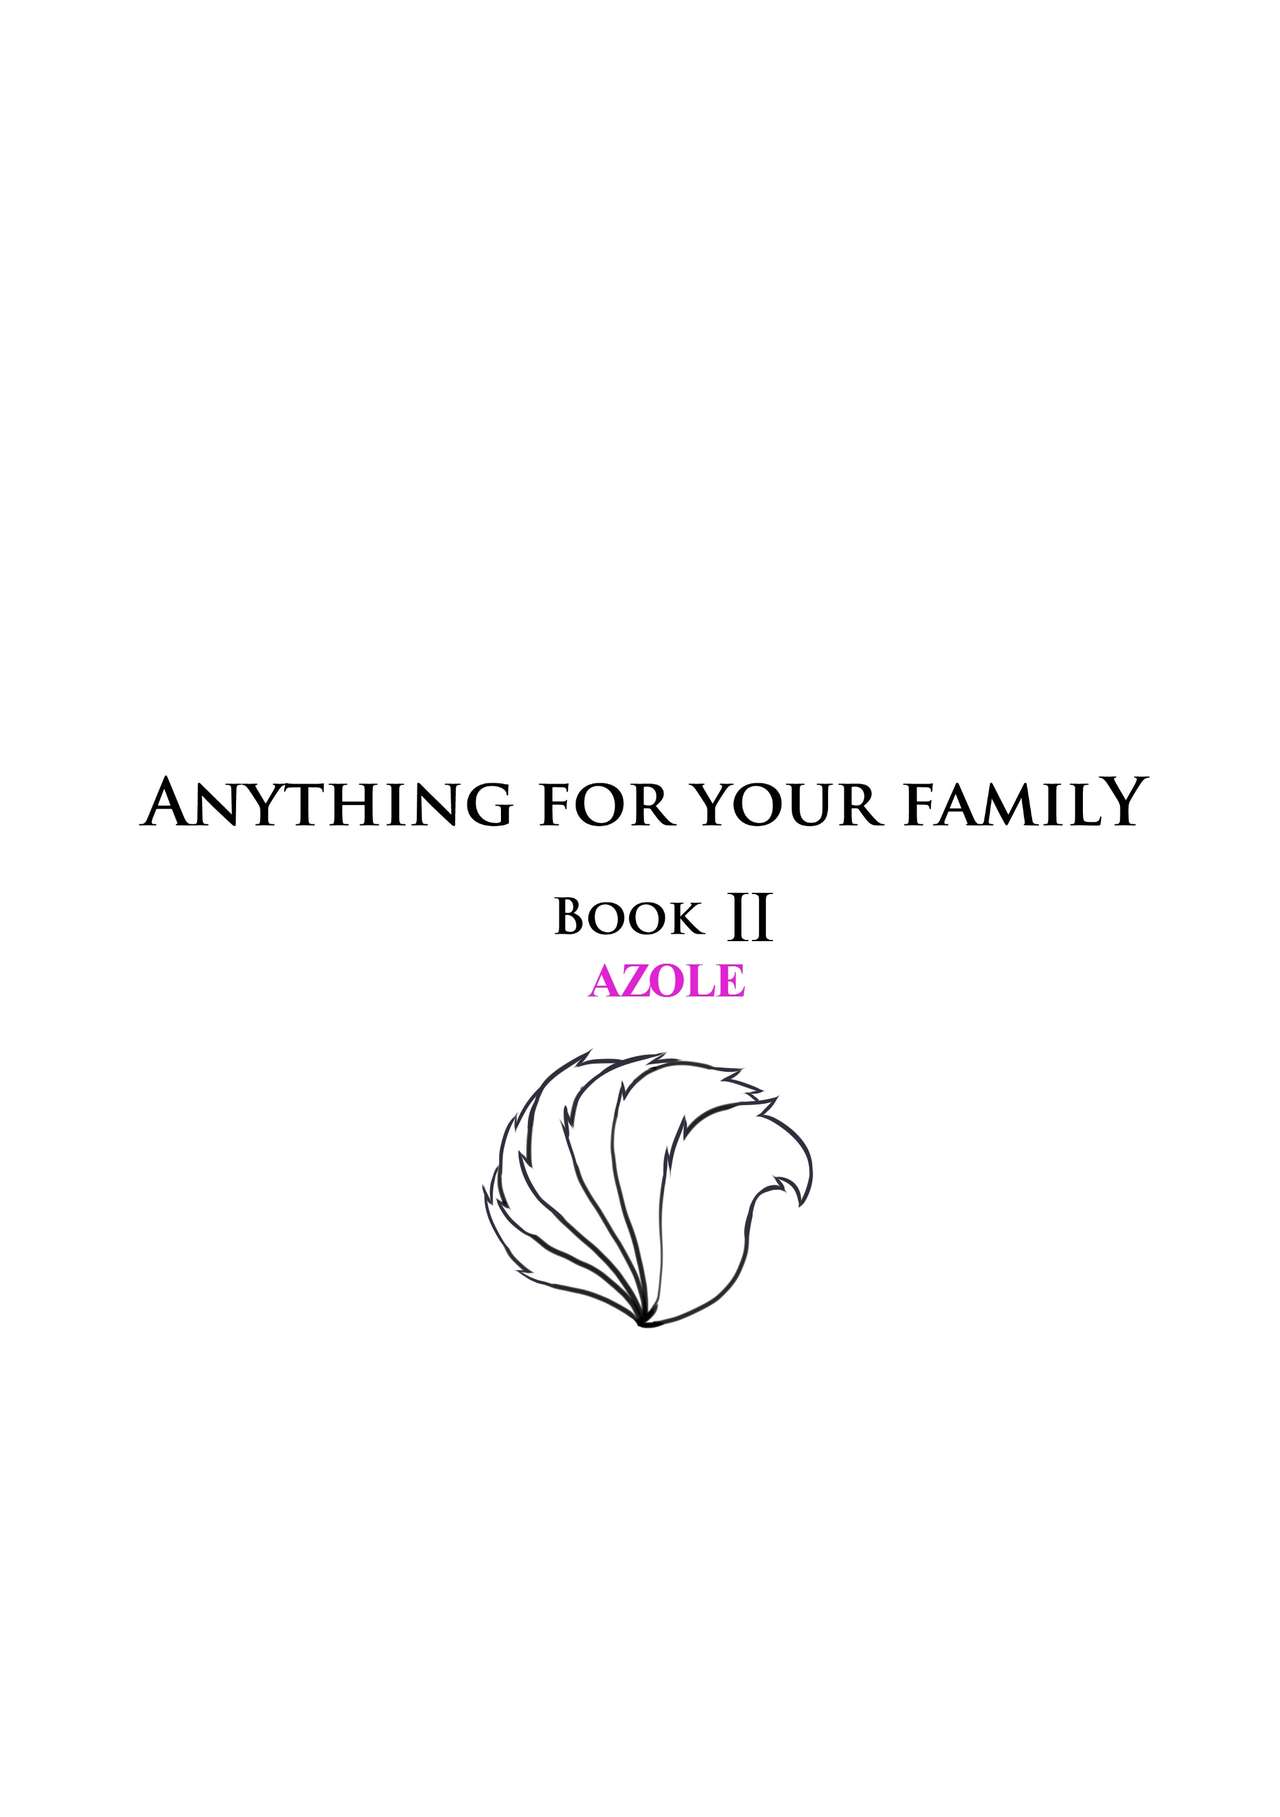 [Aogami] Anything For Your Family Book 2 Azole_00.jpg